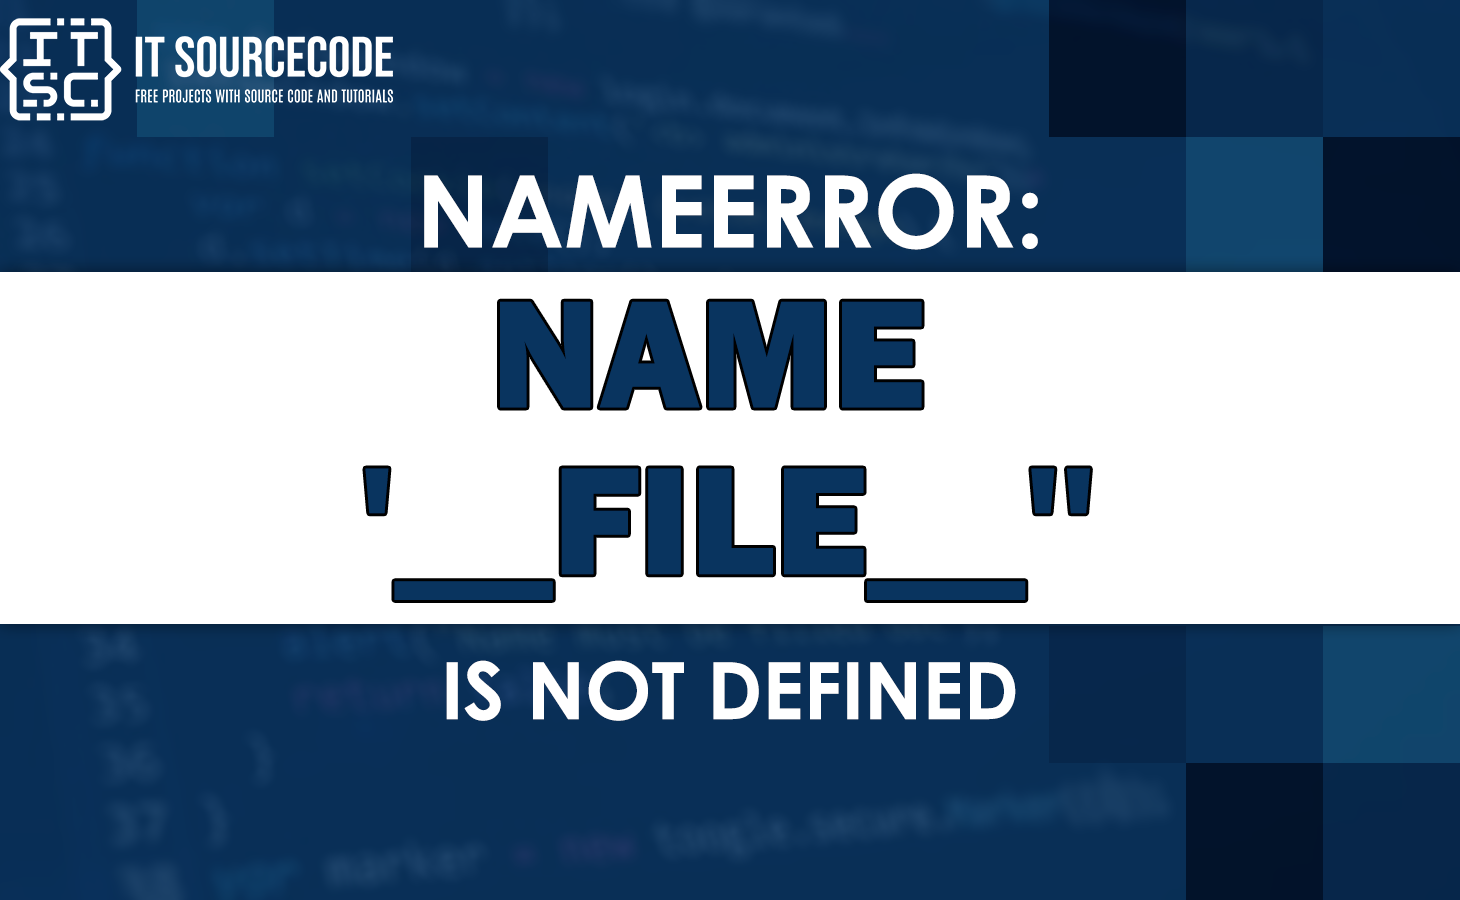 Nameerror: name '__file__' is not defined